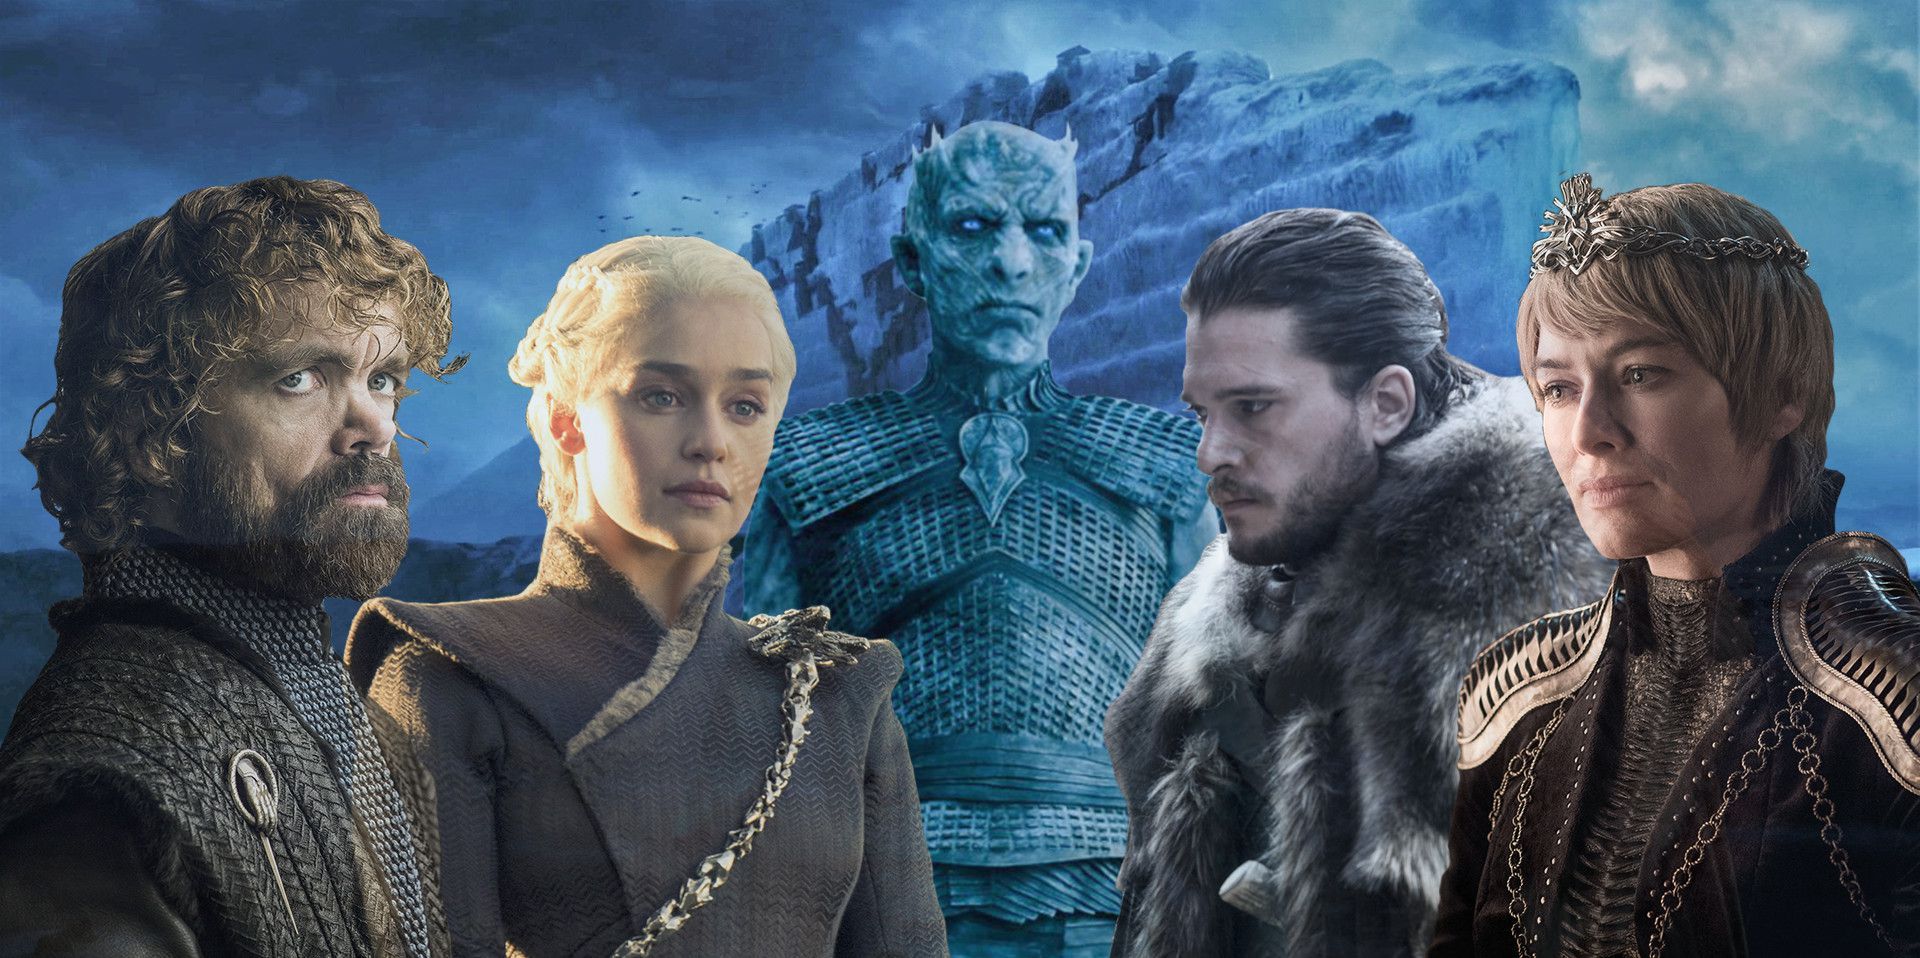                               How Game of Throne Season 8 ratings  plummeted – Ennui or lack of Quality?                             
                              